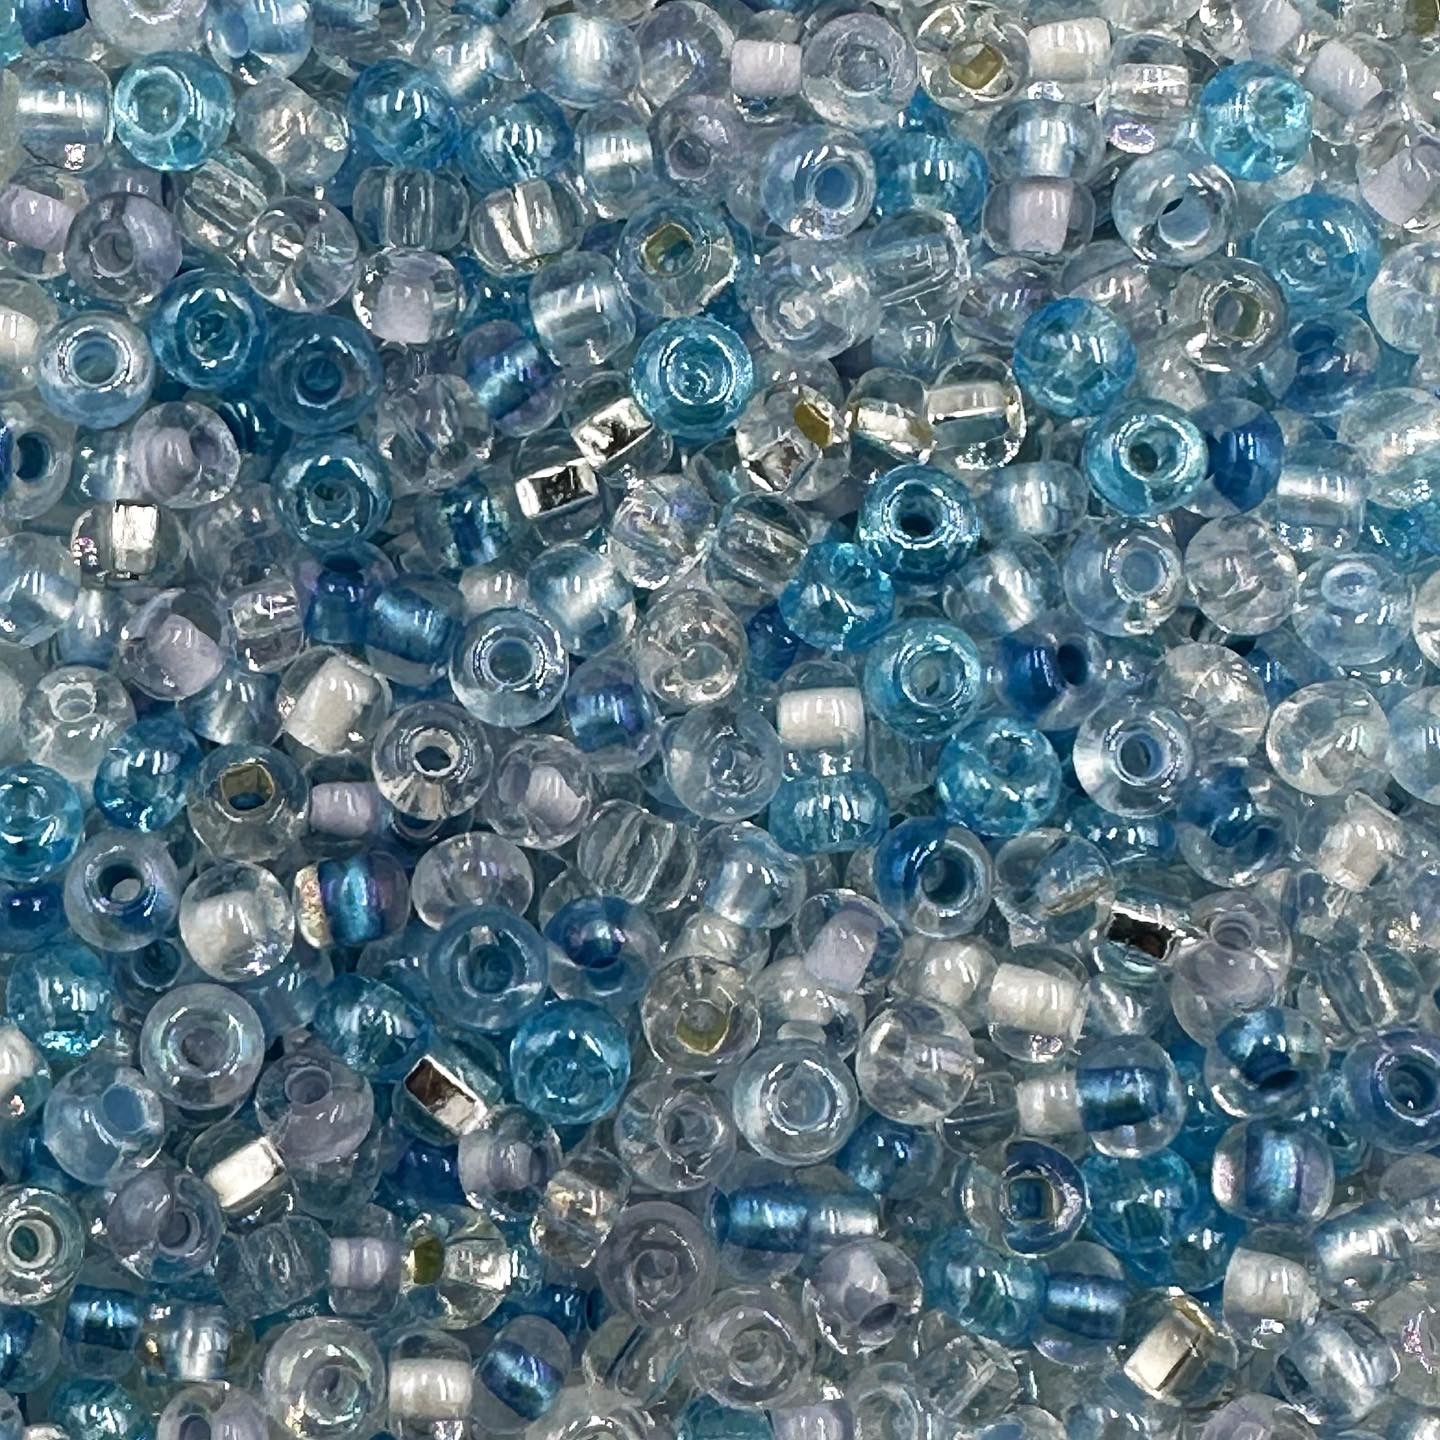  Seed Beads 11/0 Colorful Glass Seed Bead Mix